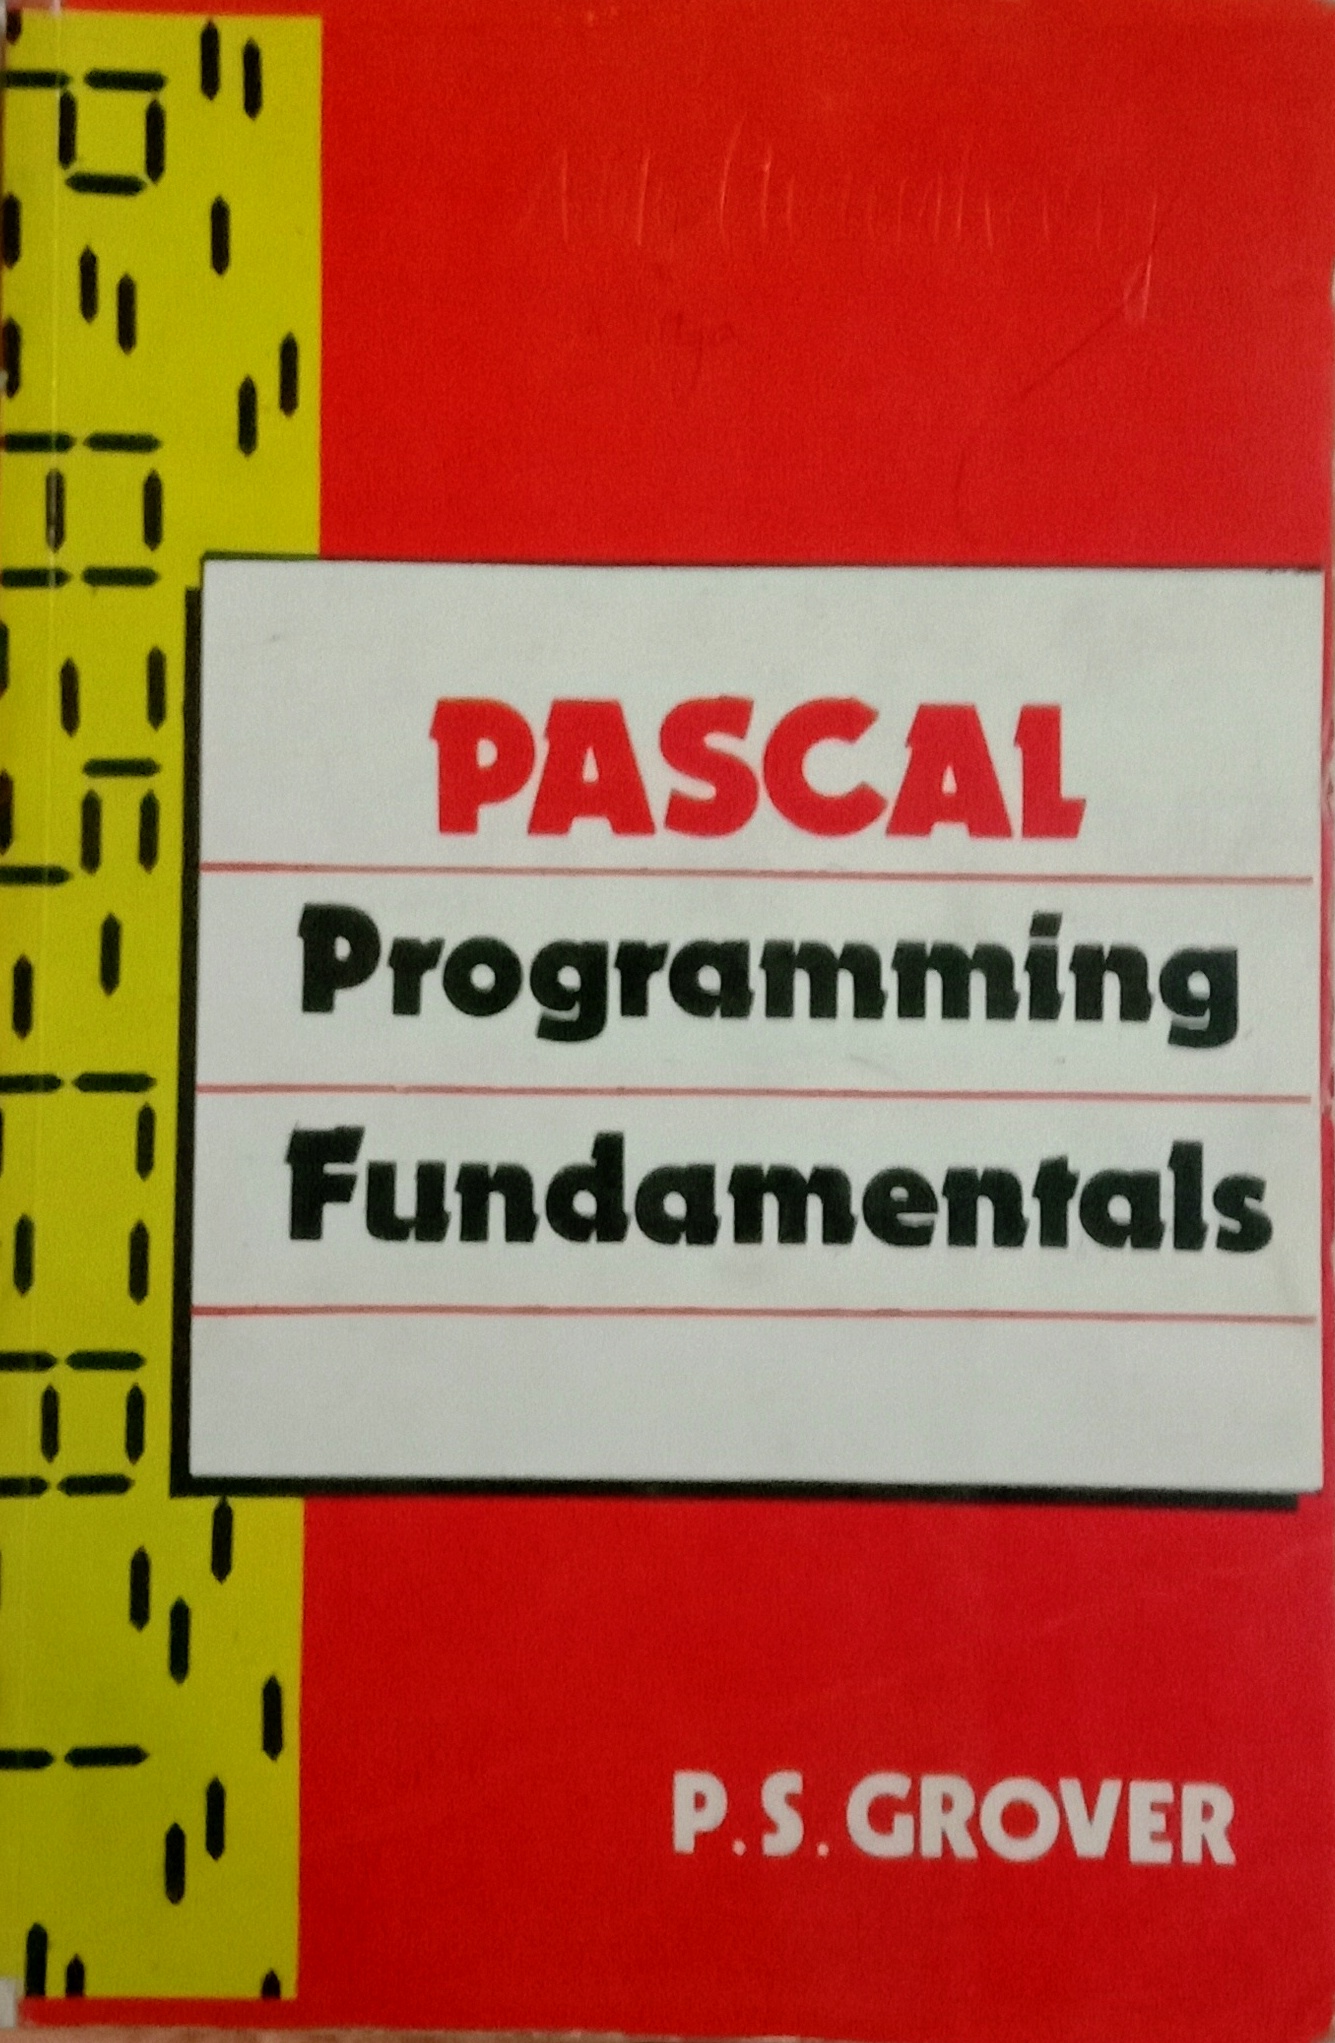 PASCAL Programming Fundamentals by P. S. Grover